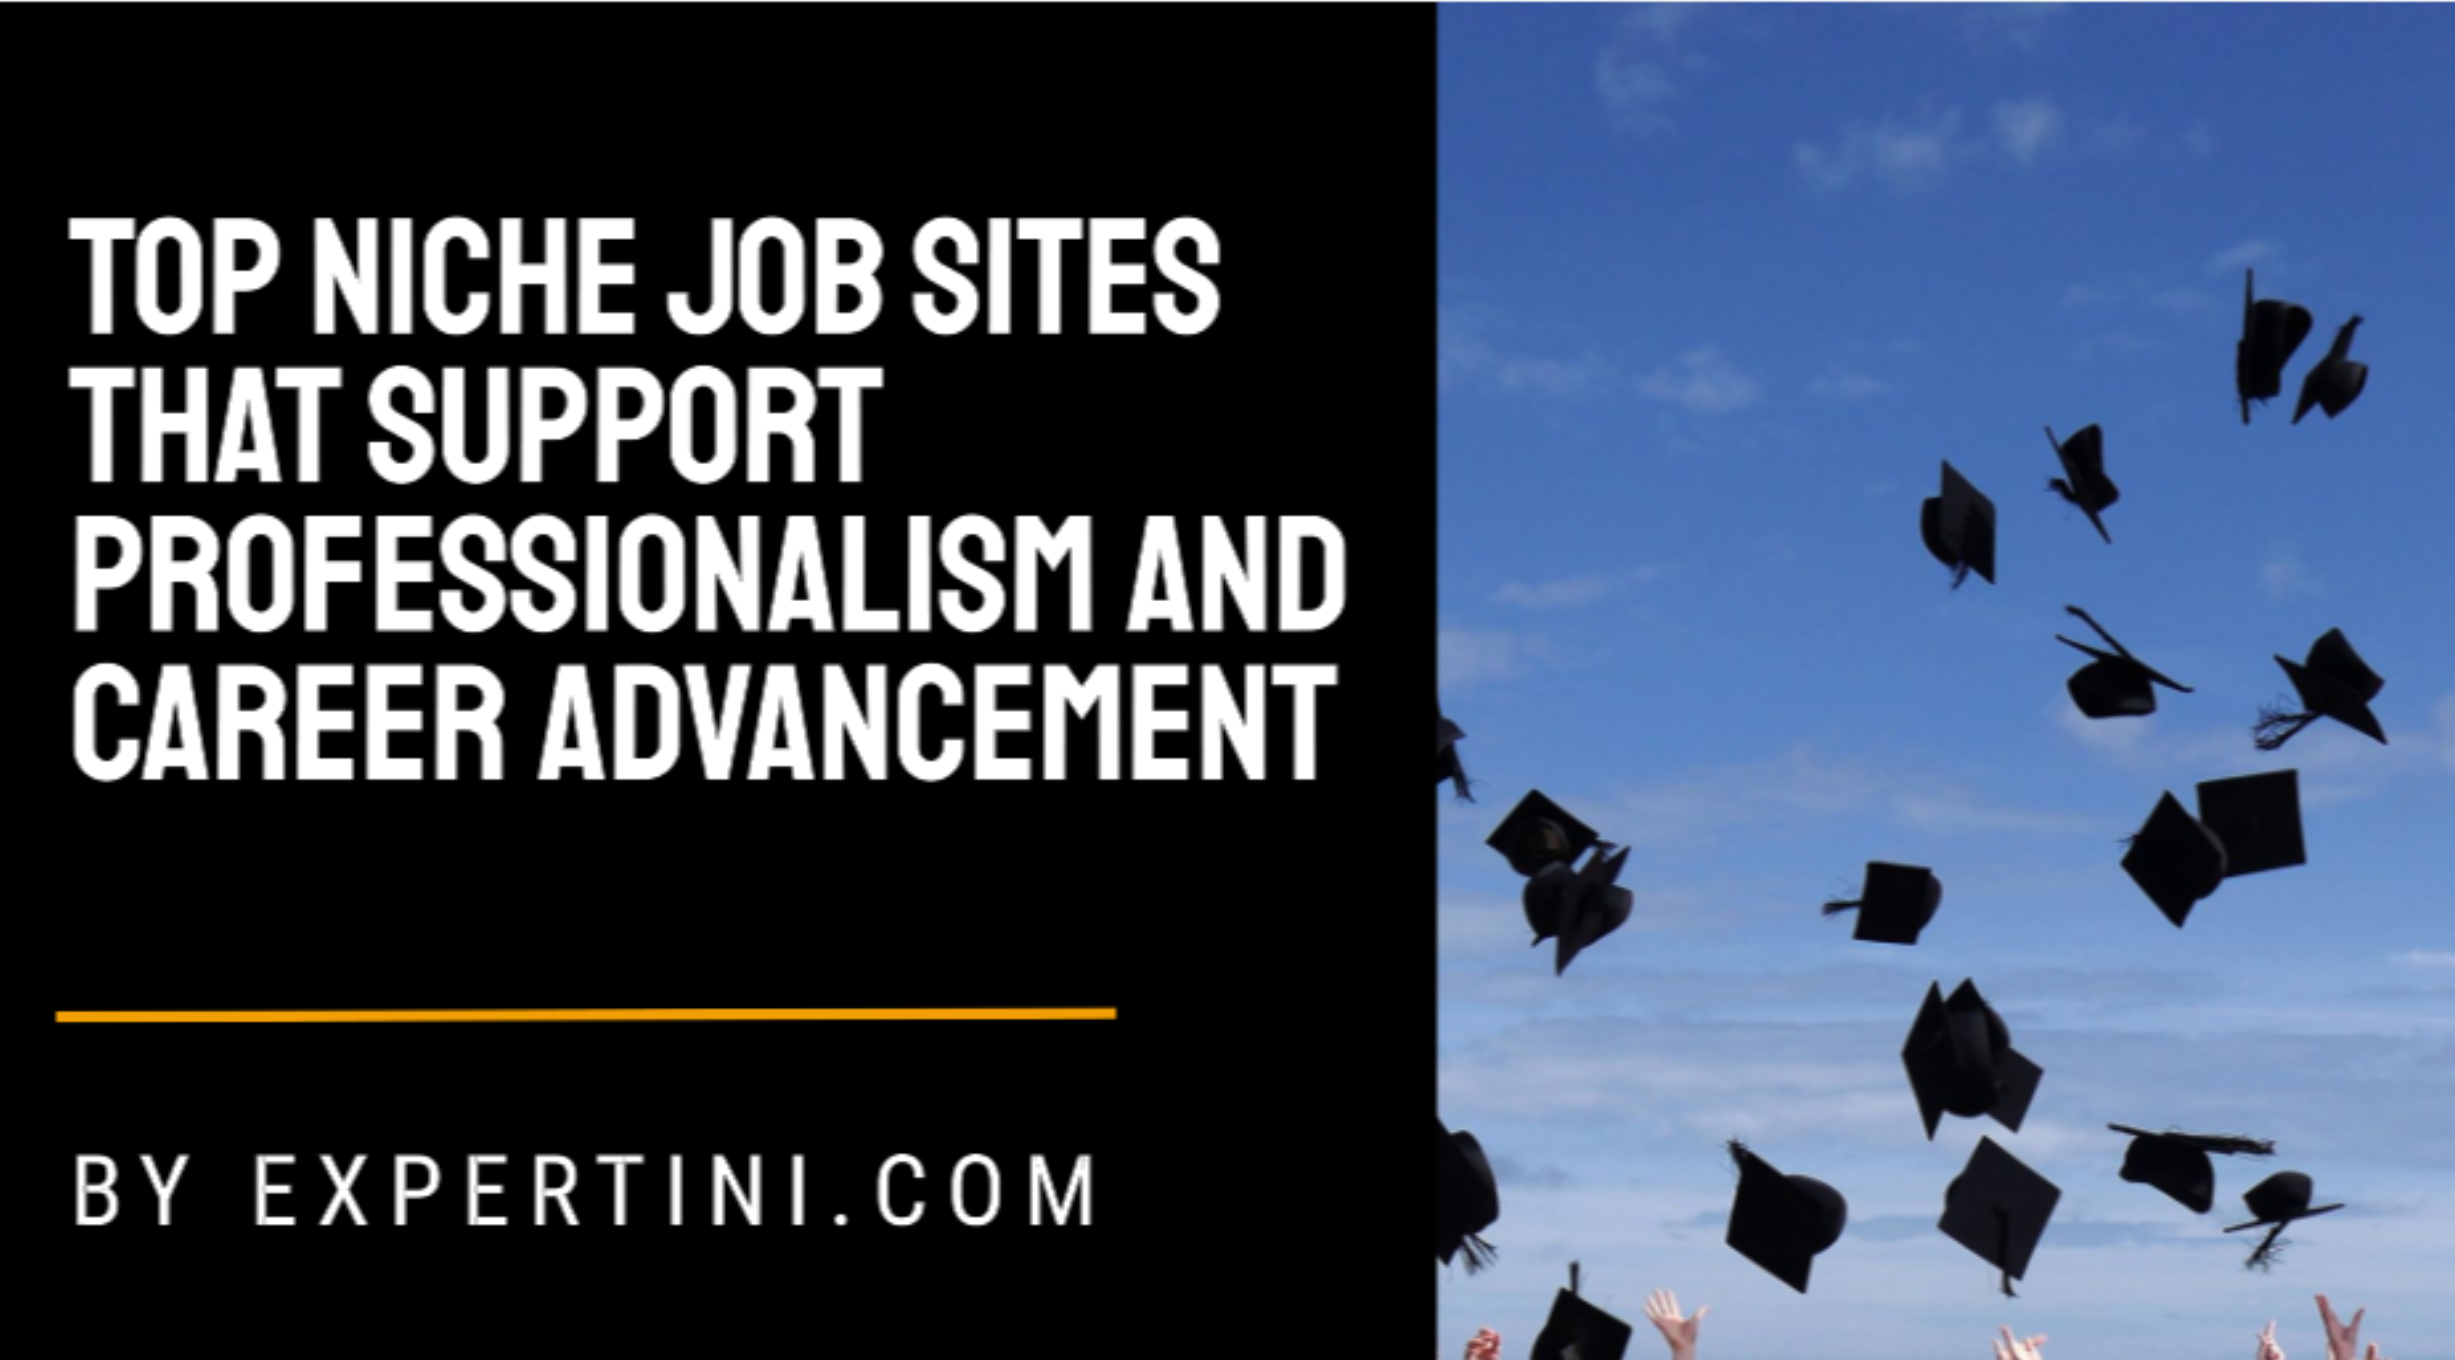 275 Top Niche Job Sites That Support Professionalism and Career Advancement for India